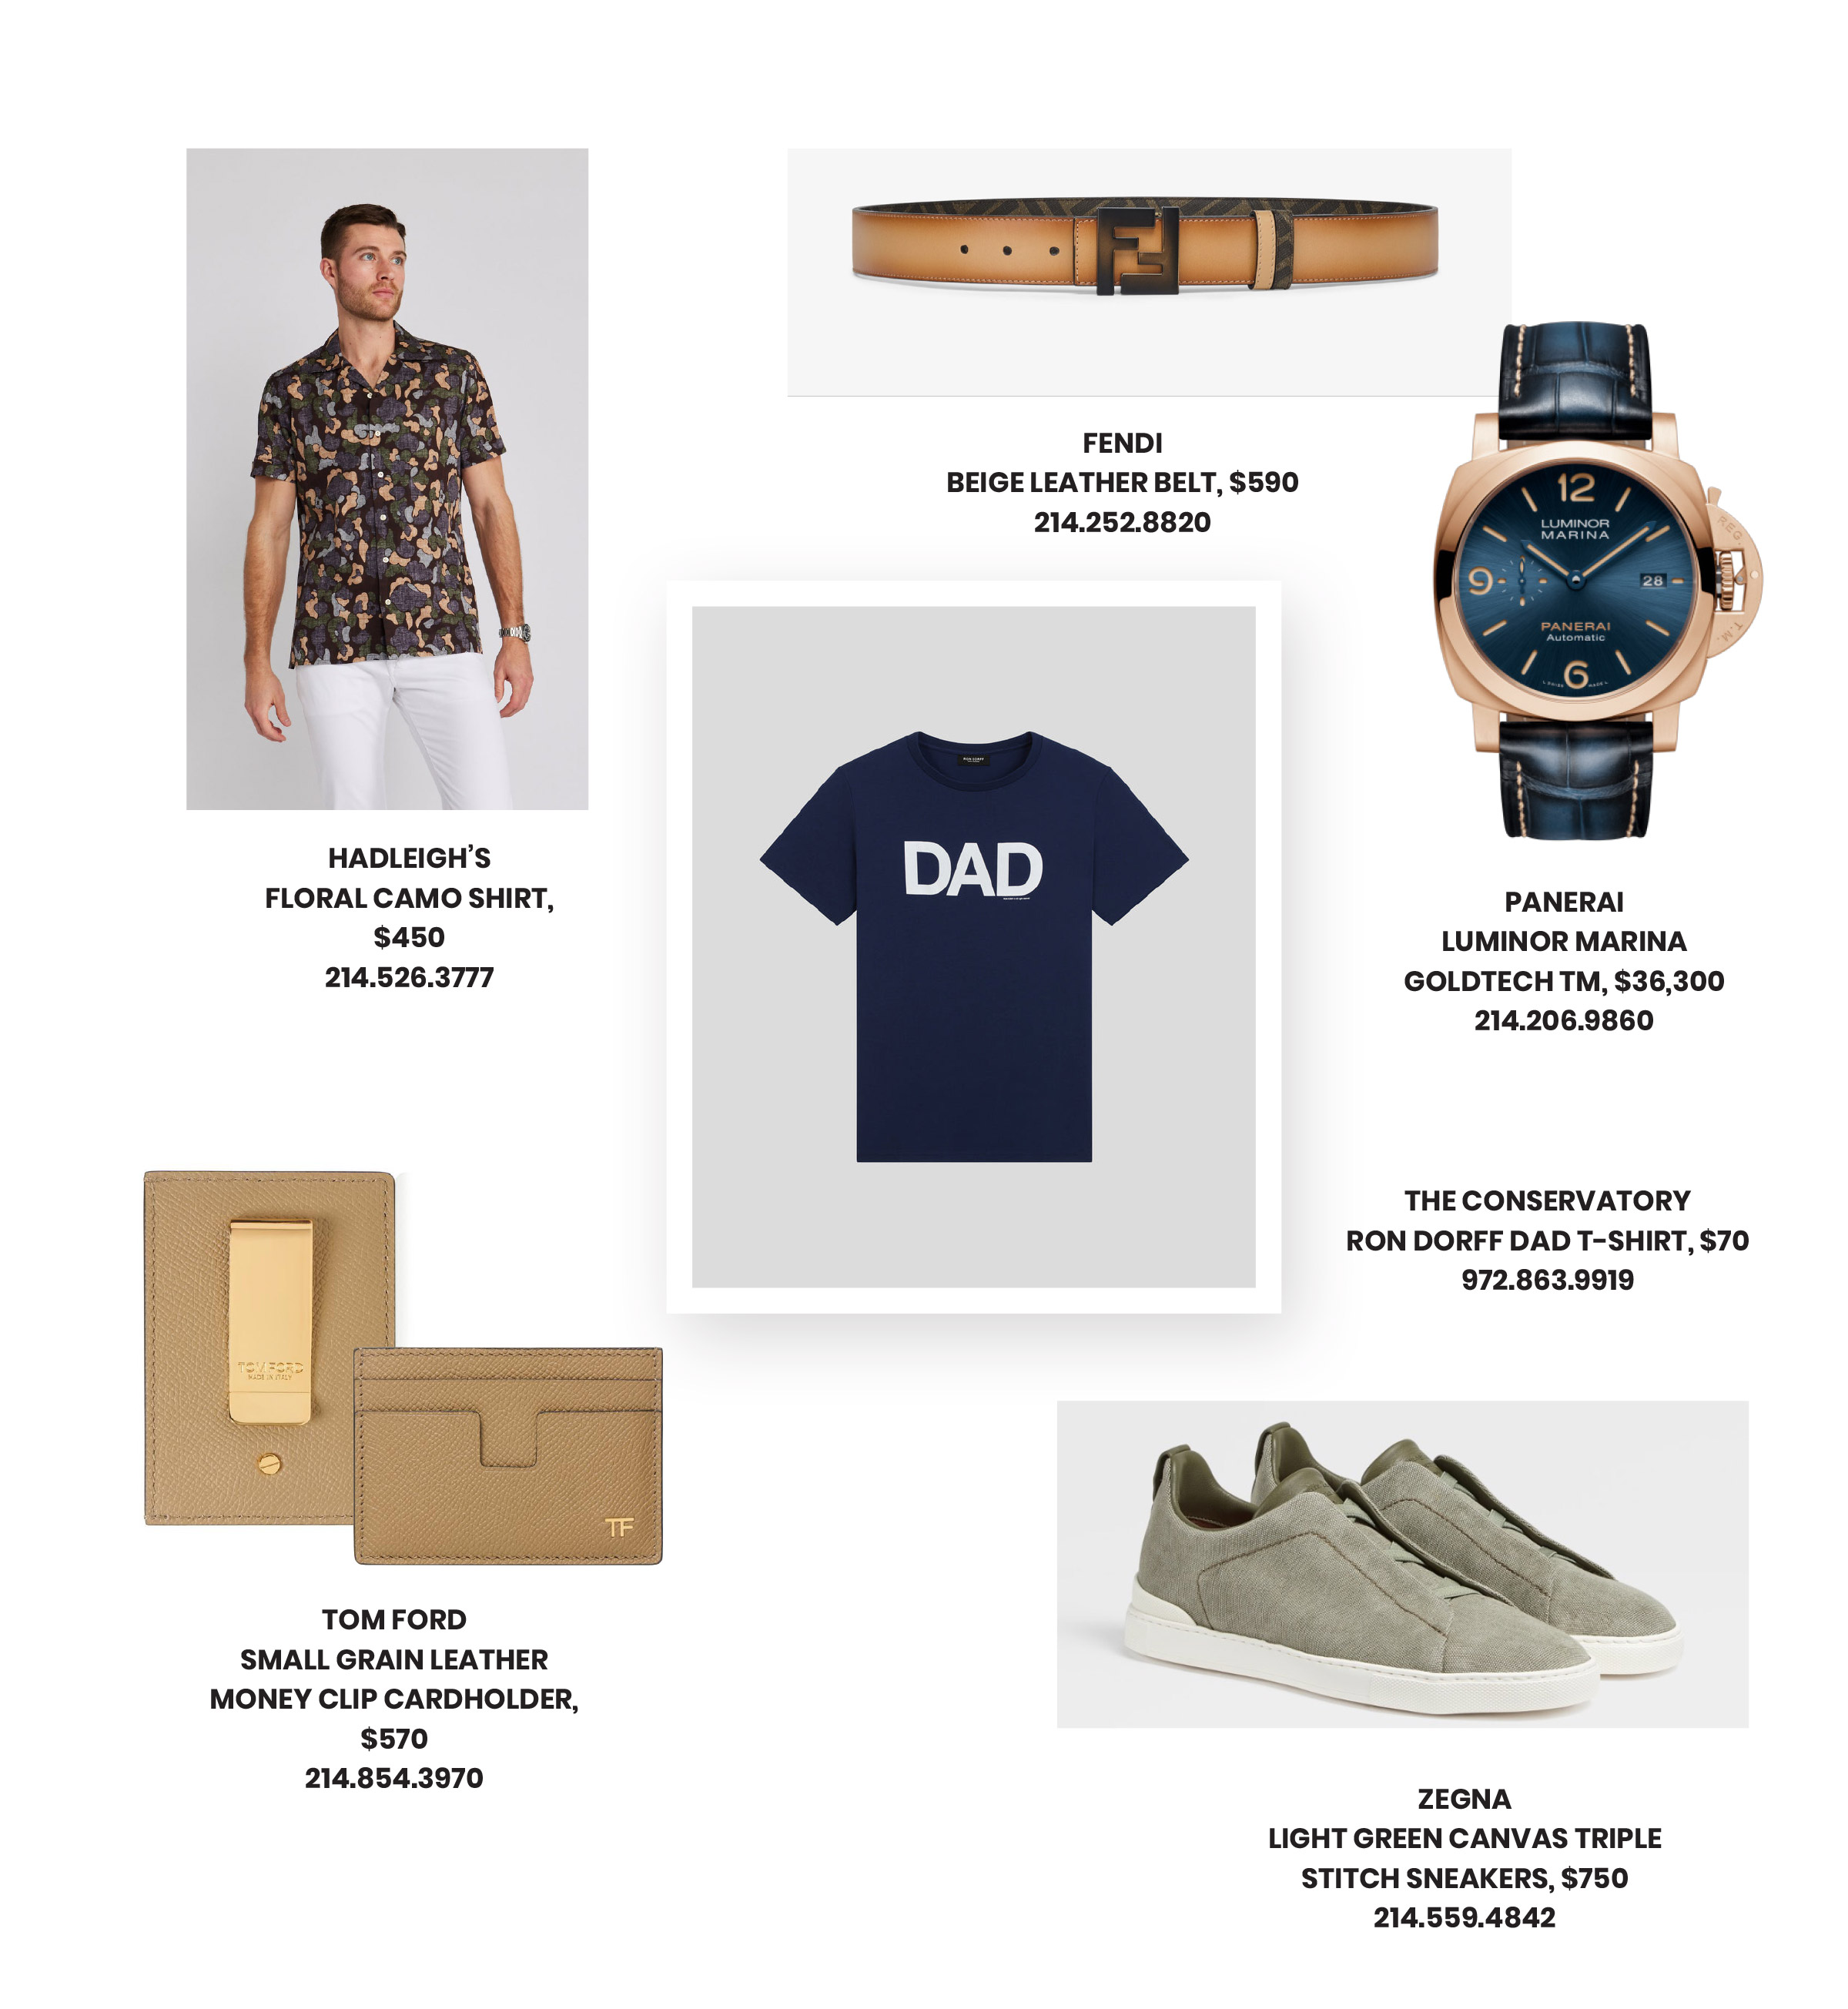 Father’s Day Gifts featuring Hadleigh’s camo shirt, Fendi belt, Panerai watch, and dad shirt